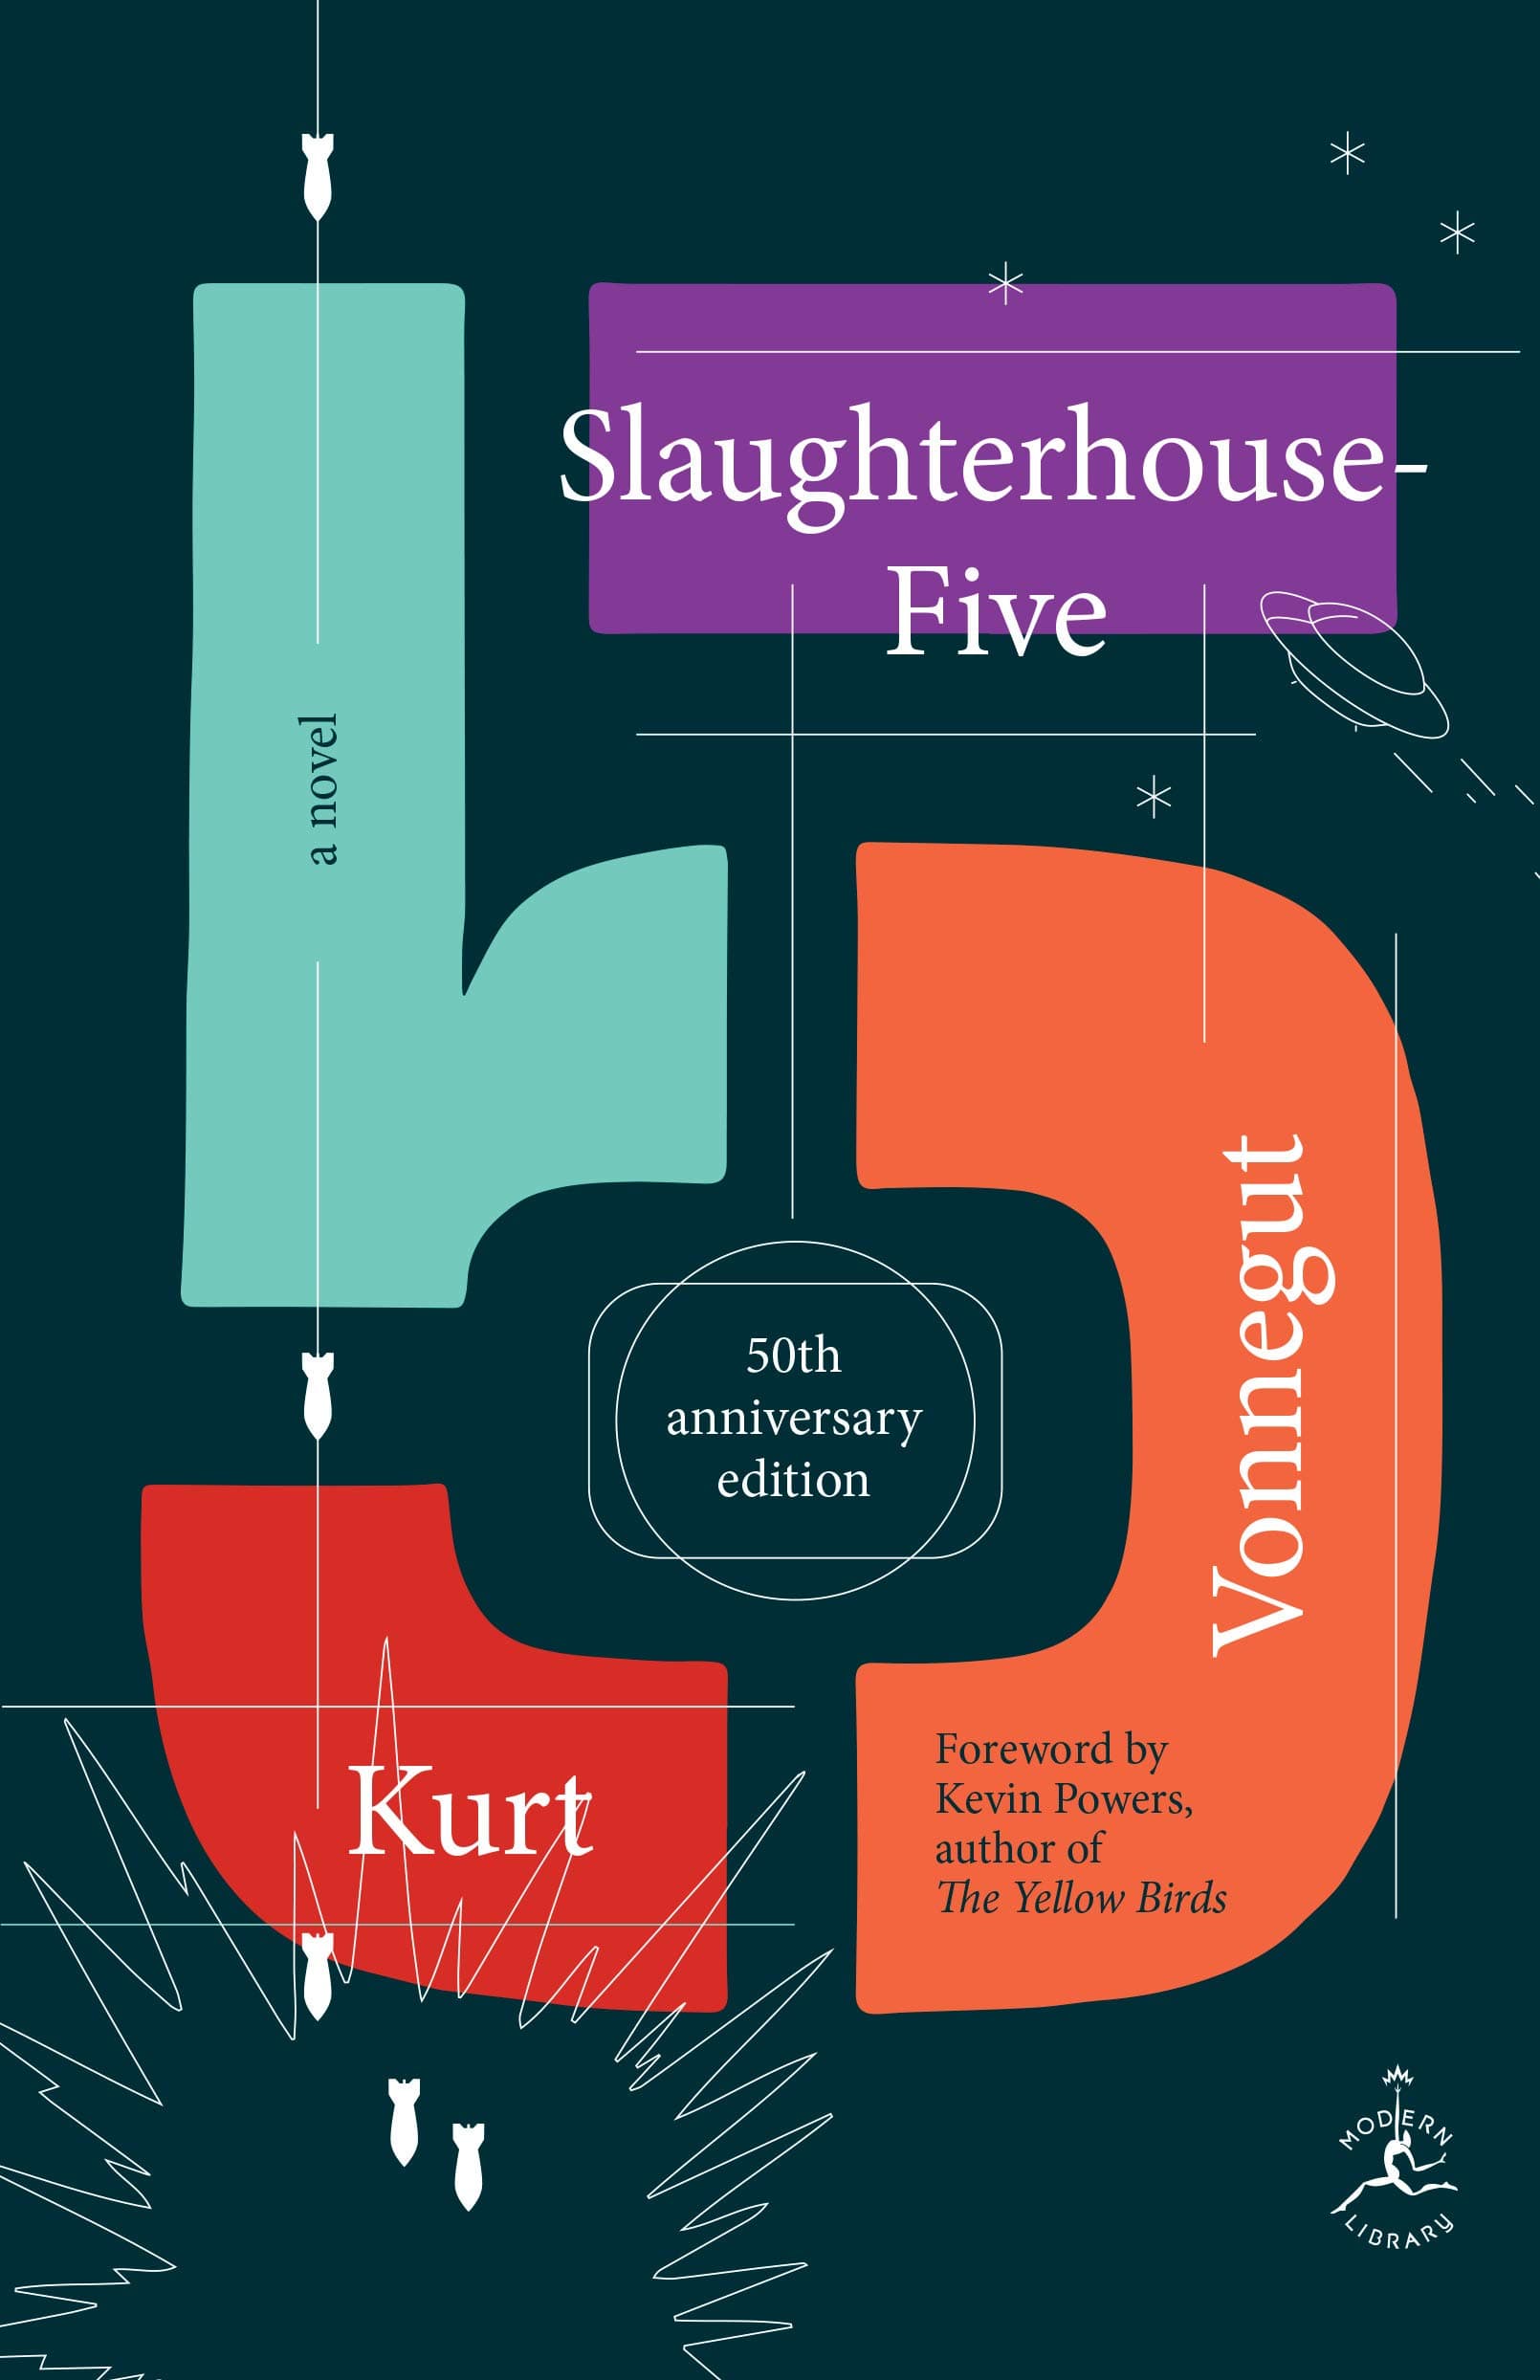 The cover of Slaughterhouse-Five